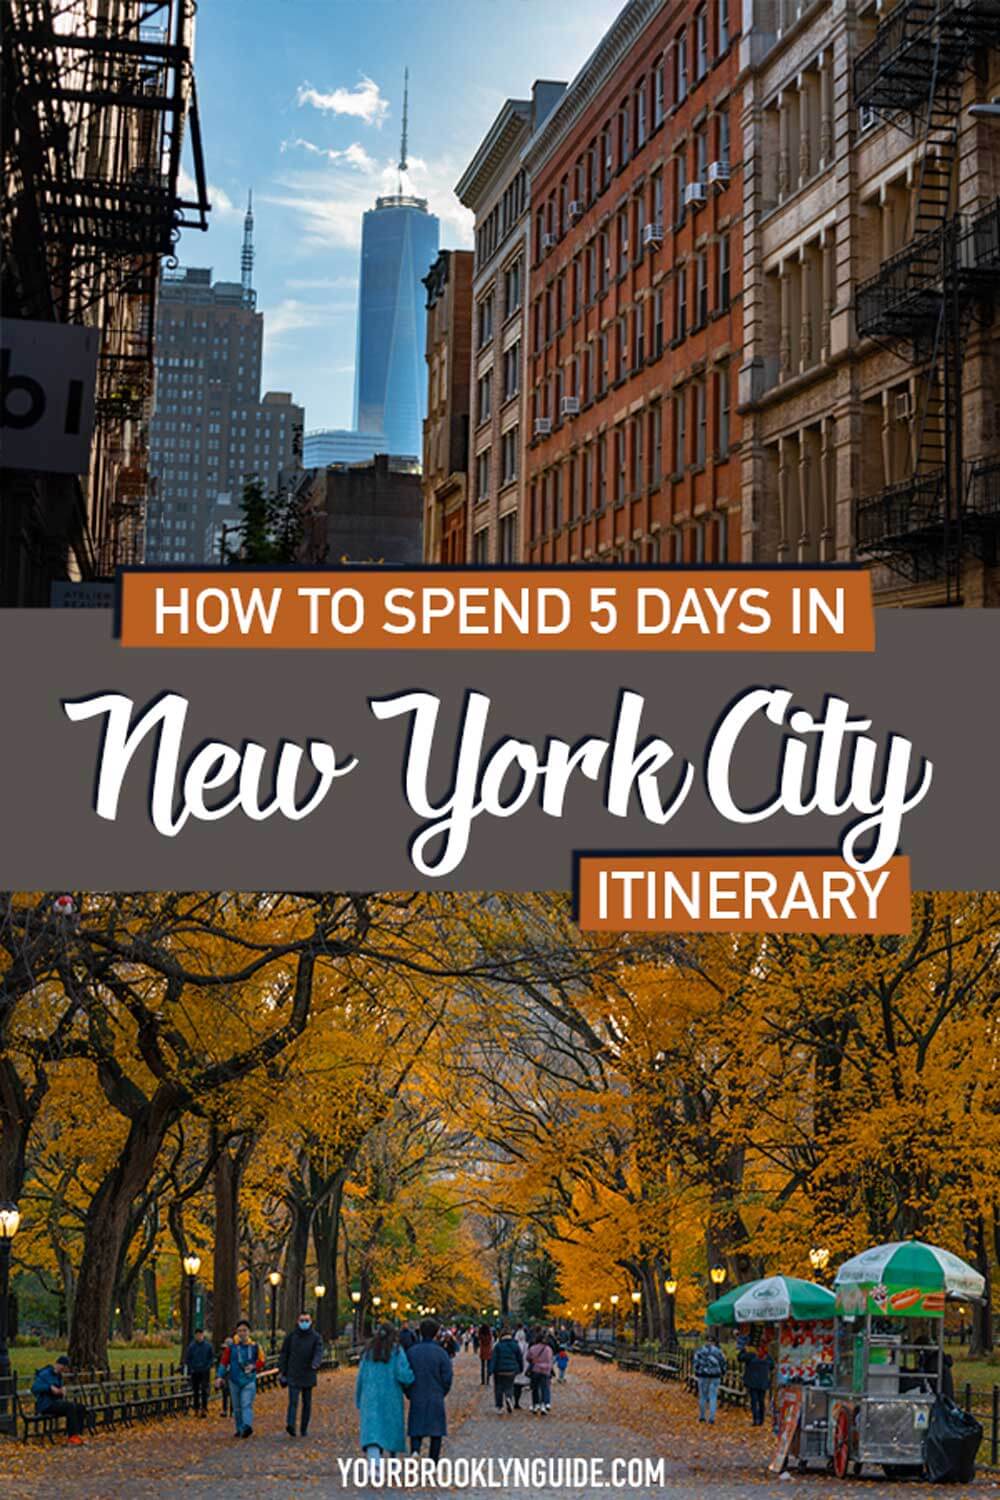 5-days-in-new-york-city-itinerary